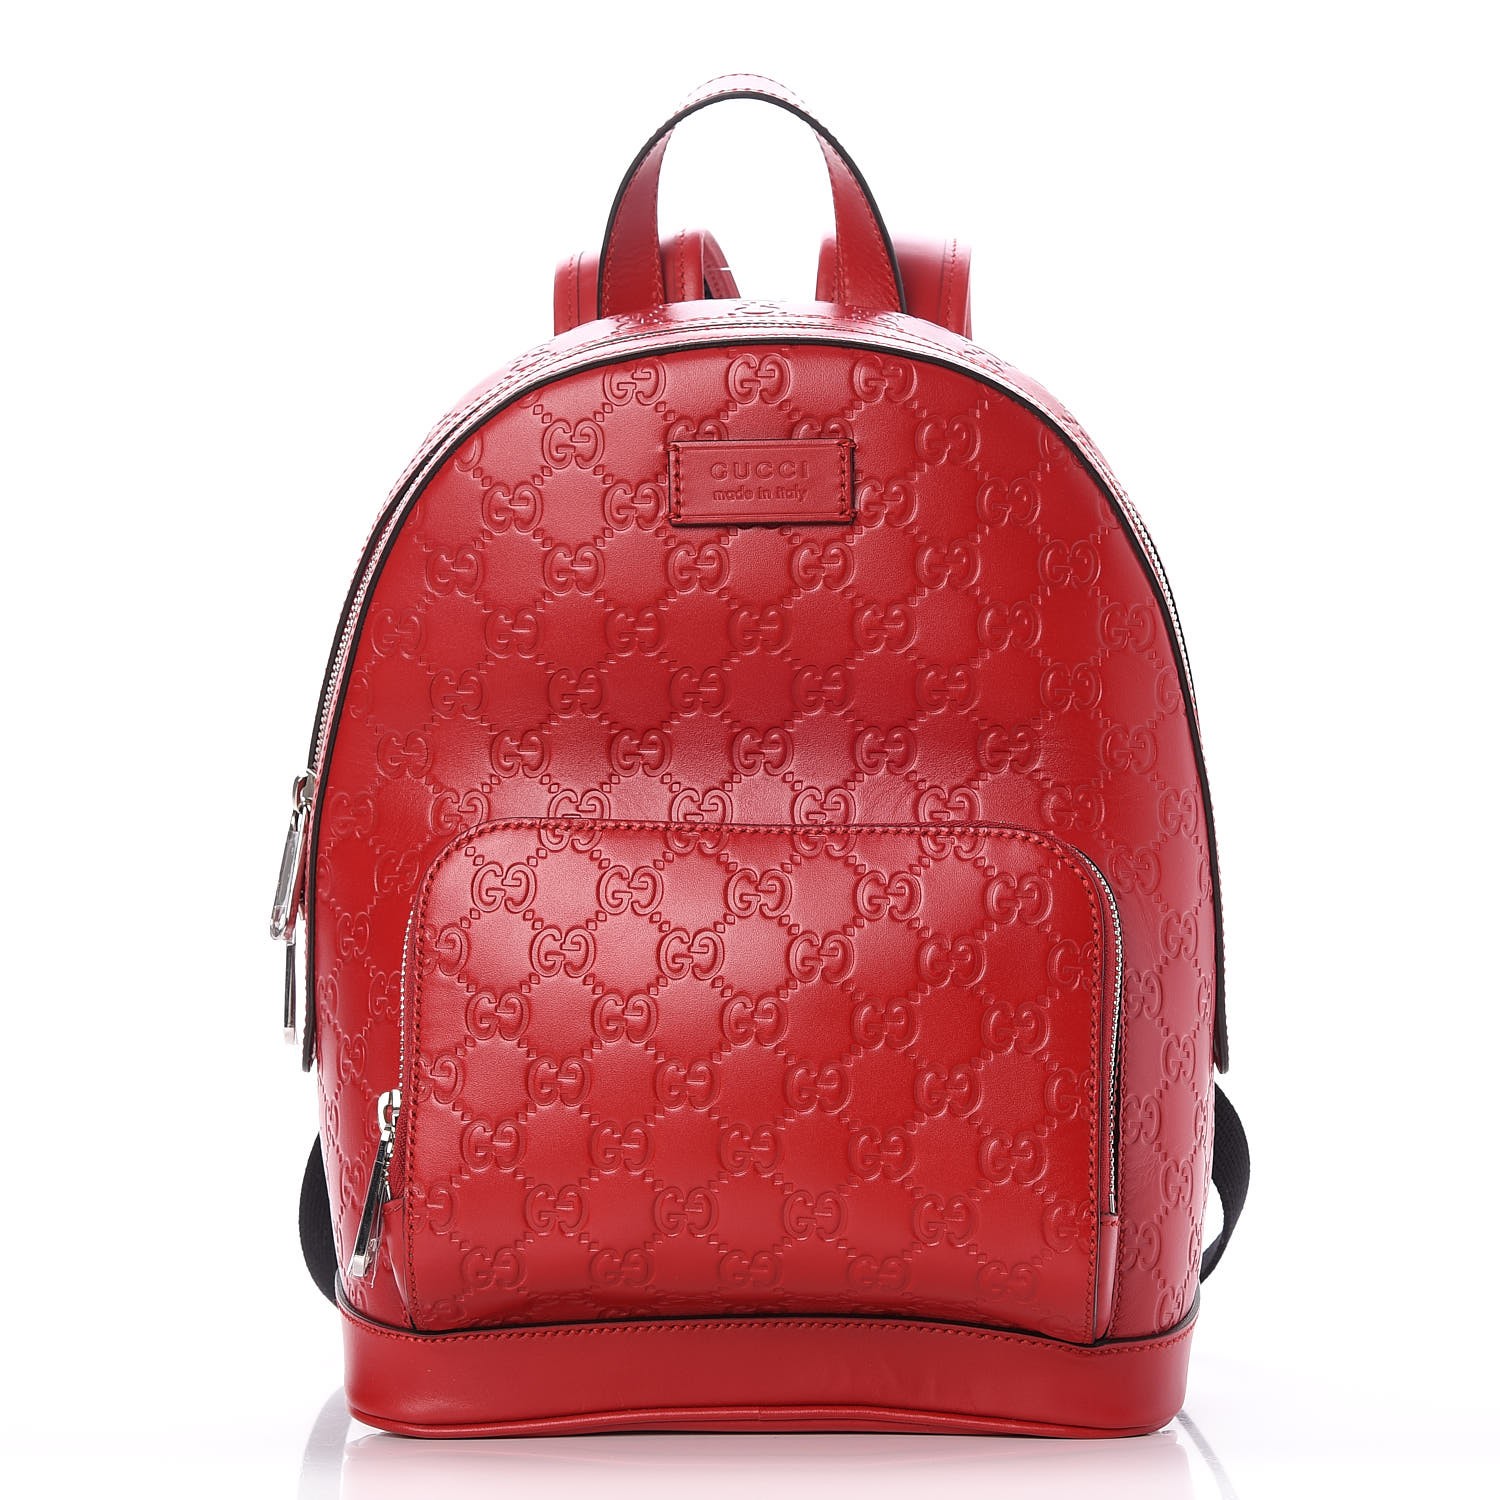 red gucci backpack, OFF 73%,welcome to buy!